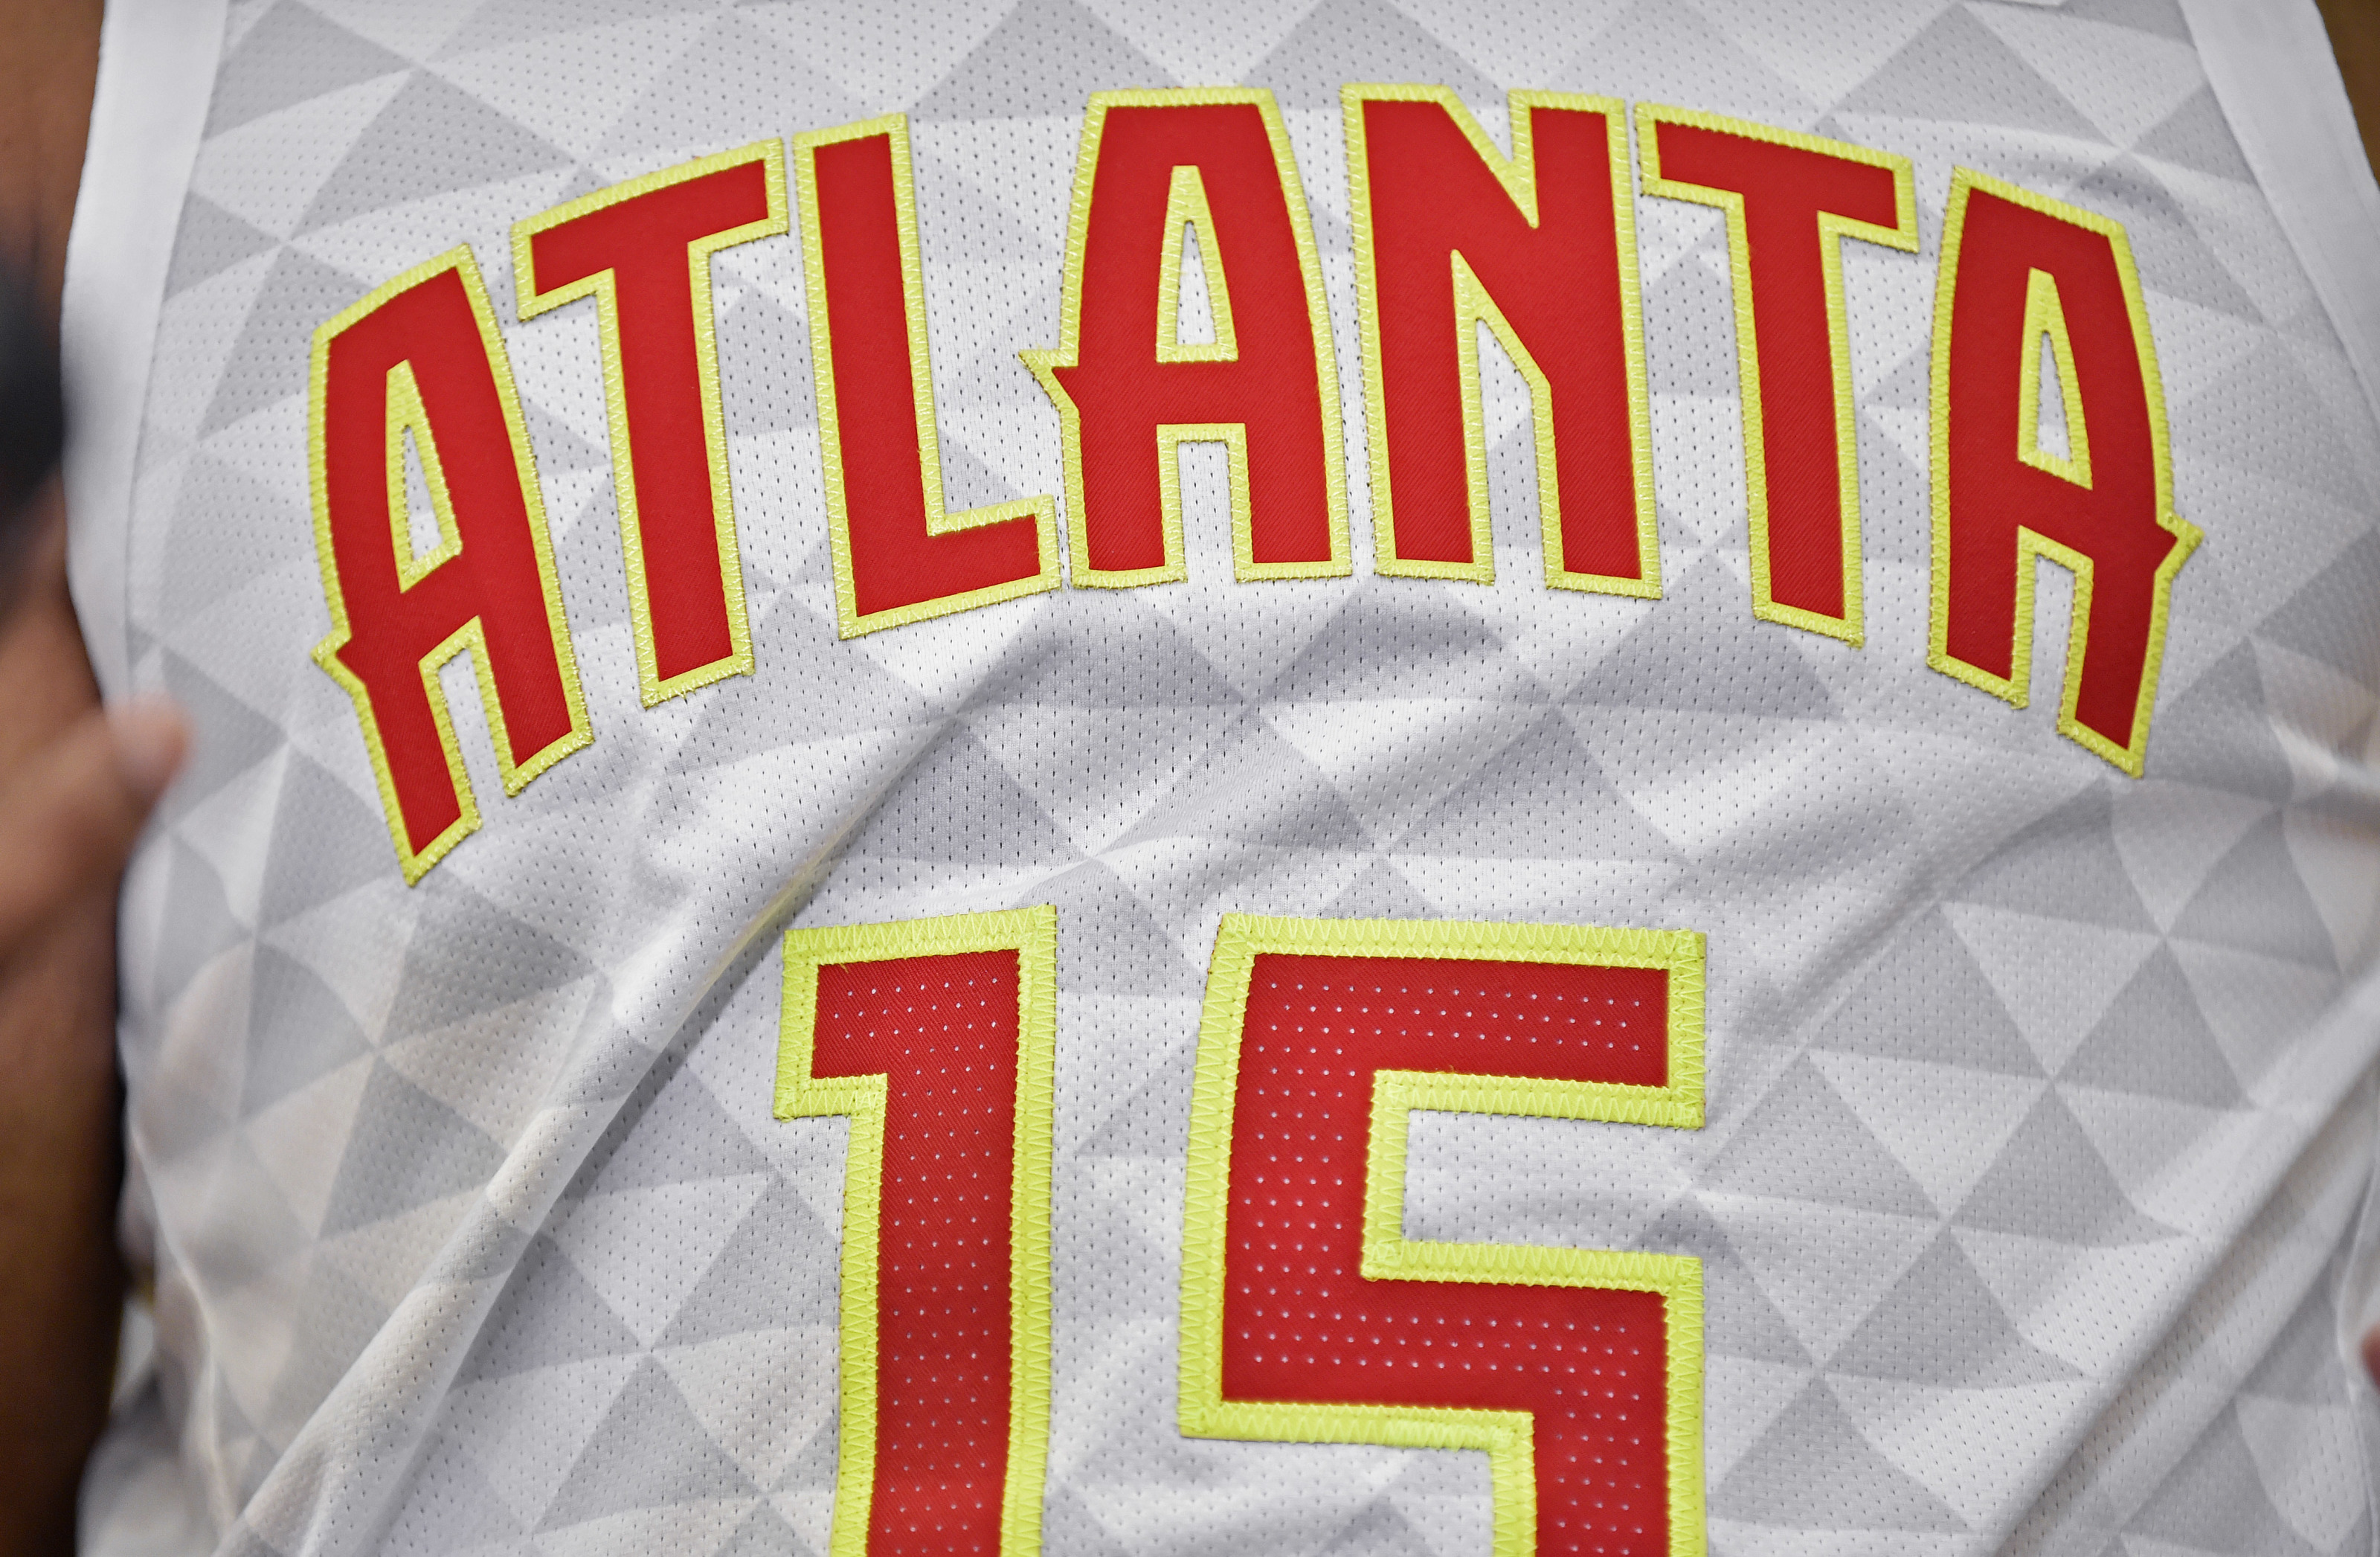 Check out the Atlanta Hawks' new court design - Peachtree Hoops